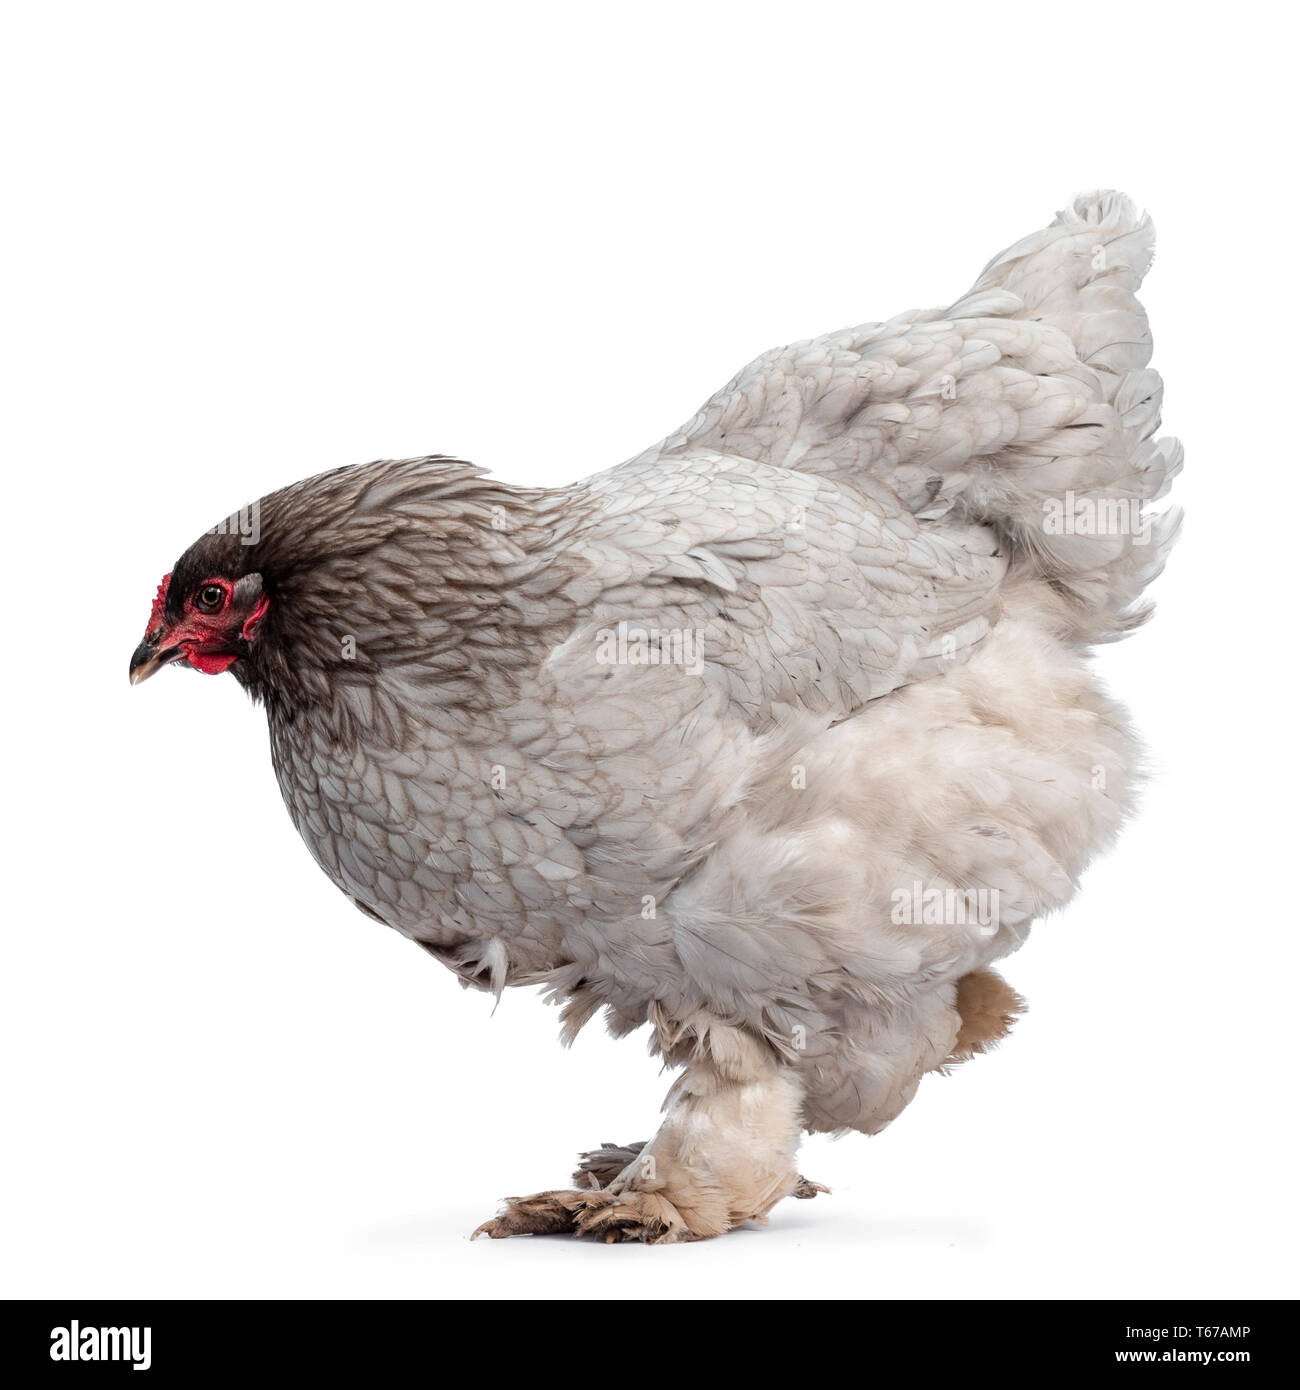 Brahma Rooster and hen, chicken, standing with chicks, isolated on white  Stock Photo by Lifeonwhite